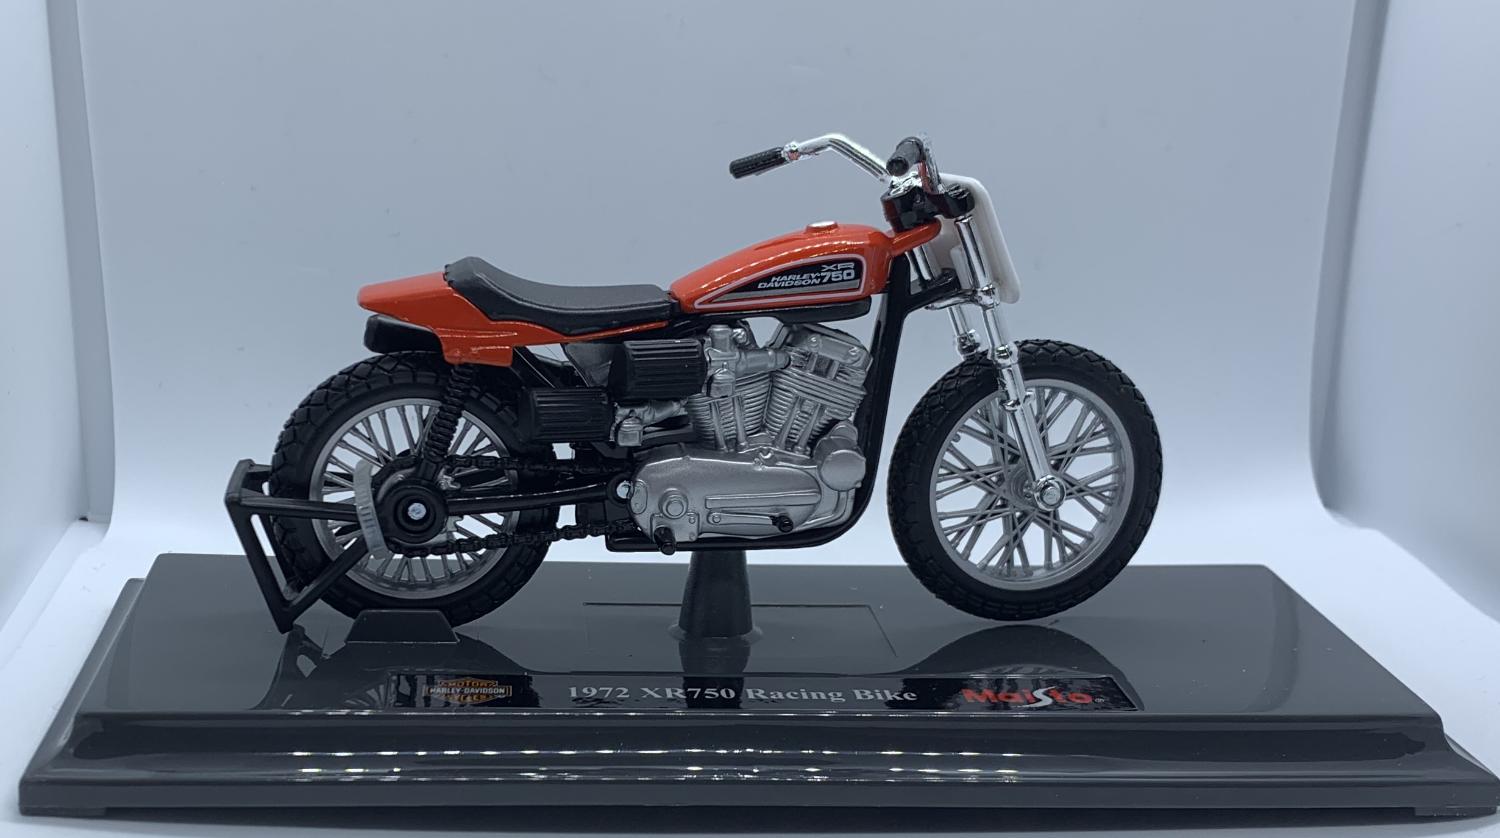 Harley Davidson 1972 XR750 Racing Bike in red 1:18 scale model from Maisto